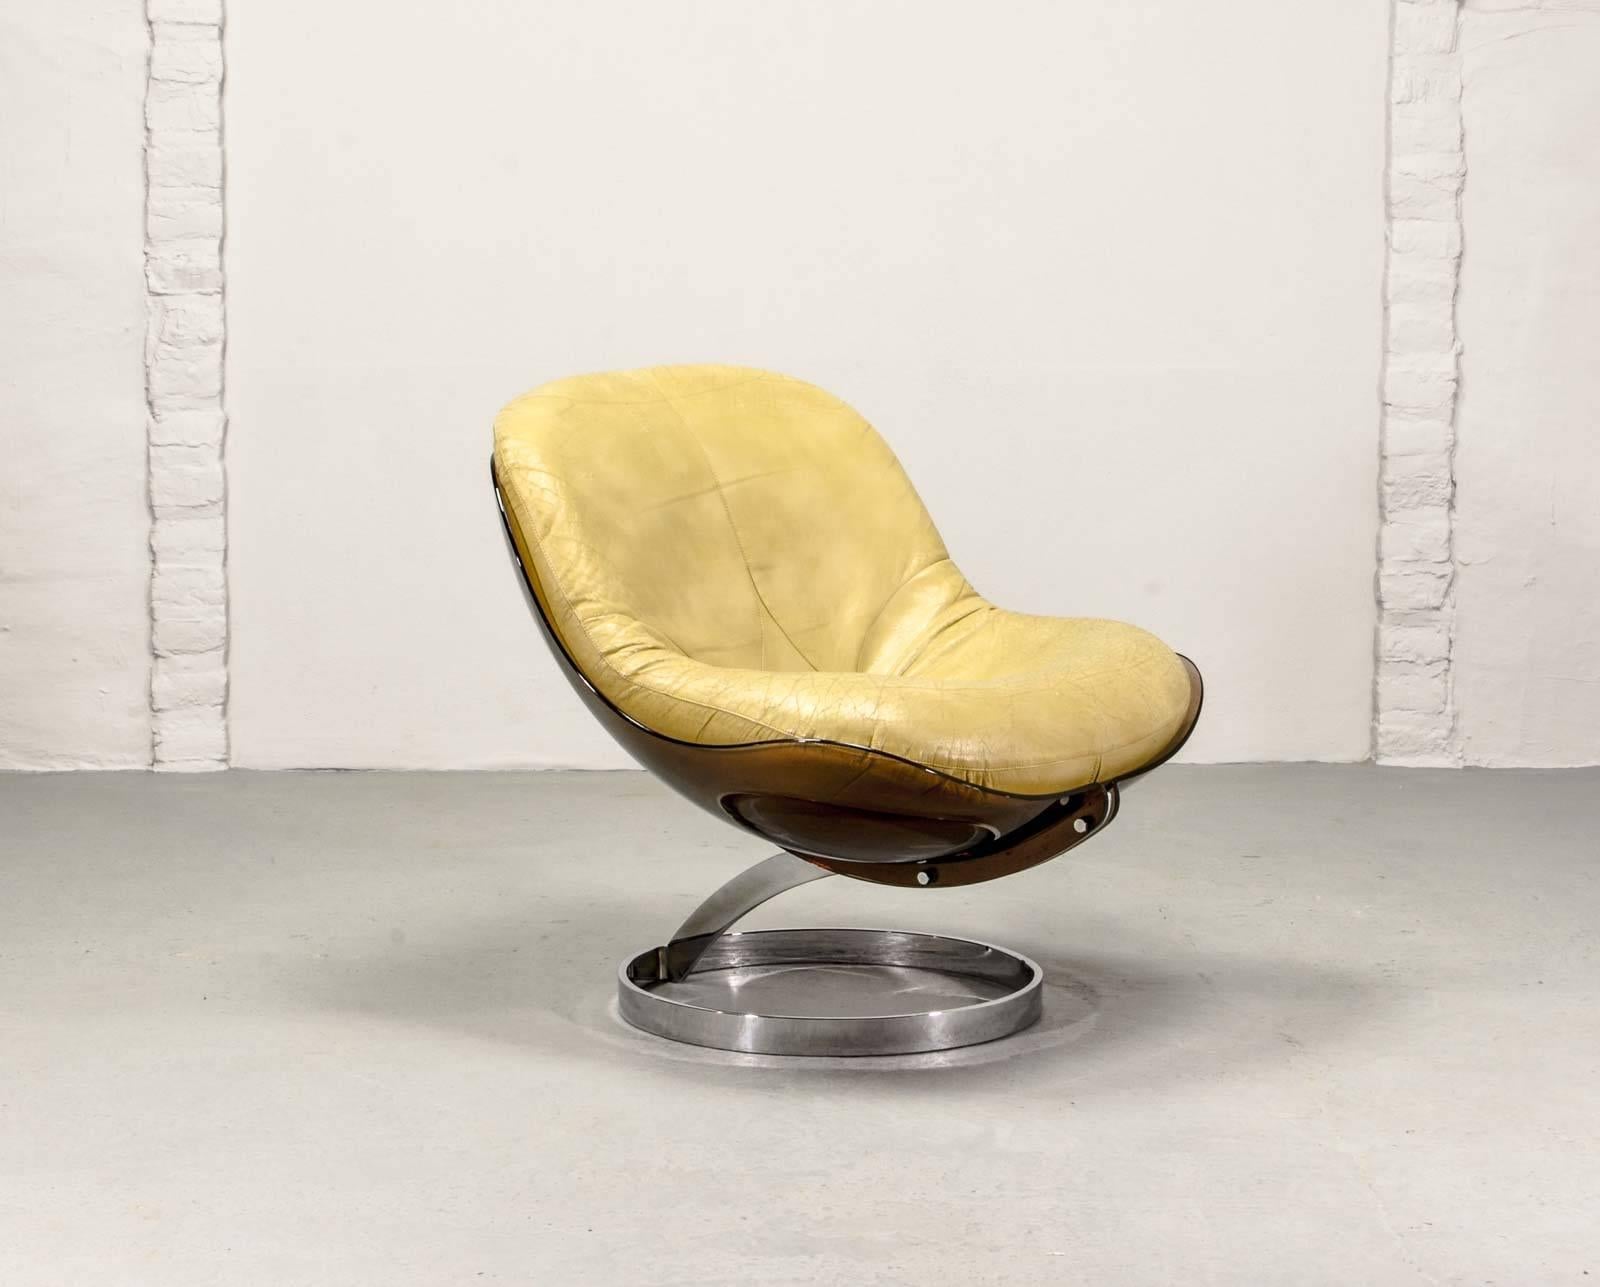 Rare 'Sphere' chair designed by Boris Tabacoff (interior architect) for M.M.M. (Mobilier Modulair Moderne) in 1971. Especially this presented low model is more rare than the high version. This stunning chair features a smoked plexiglass shell with